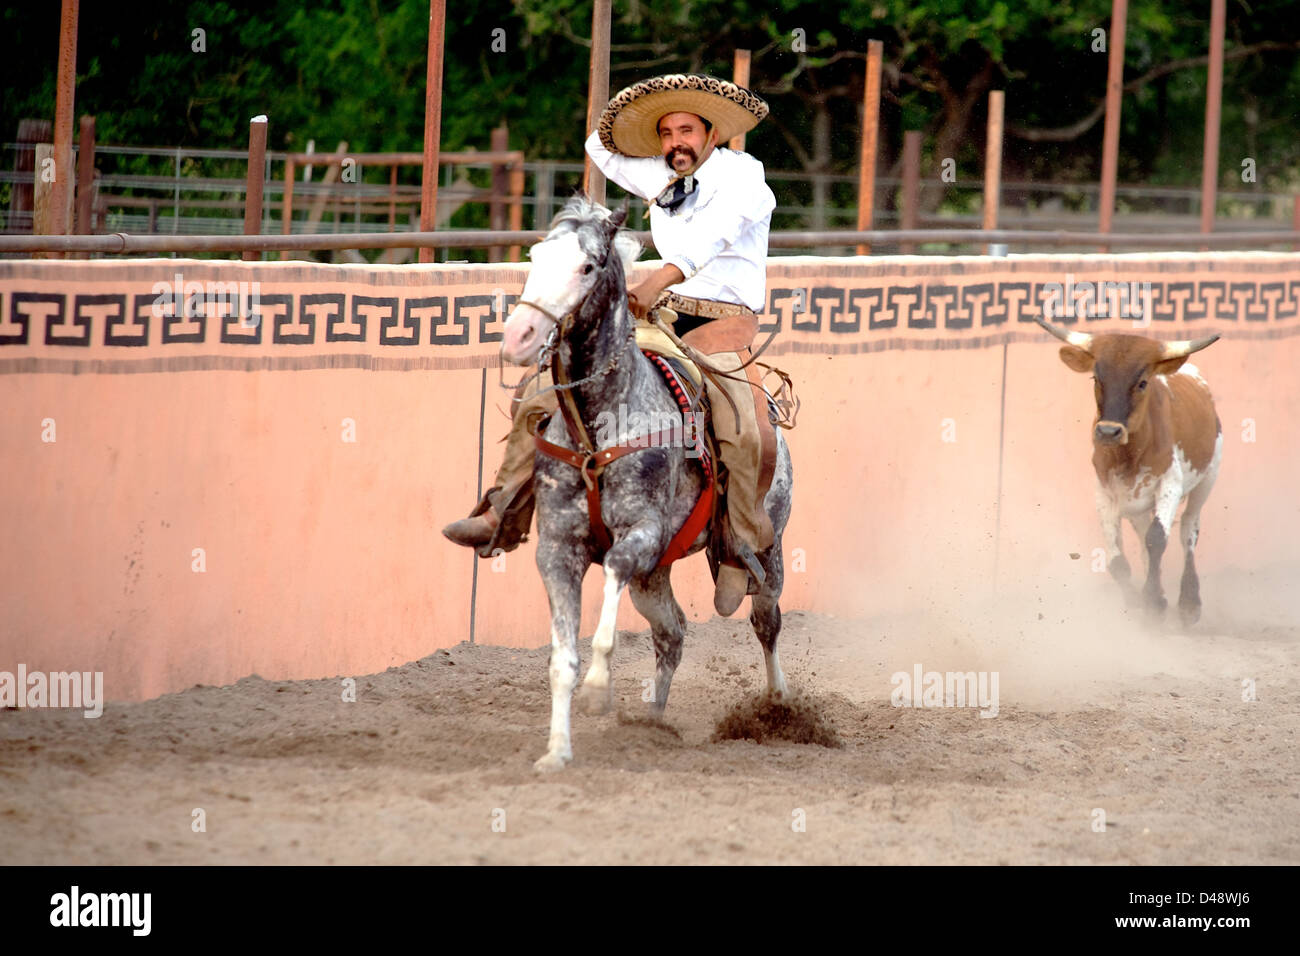 Mexican charros horseman being chased by a bull, TX, US Stock Photo